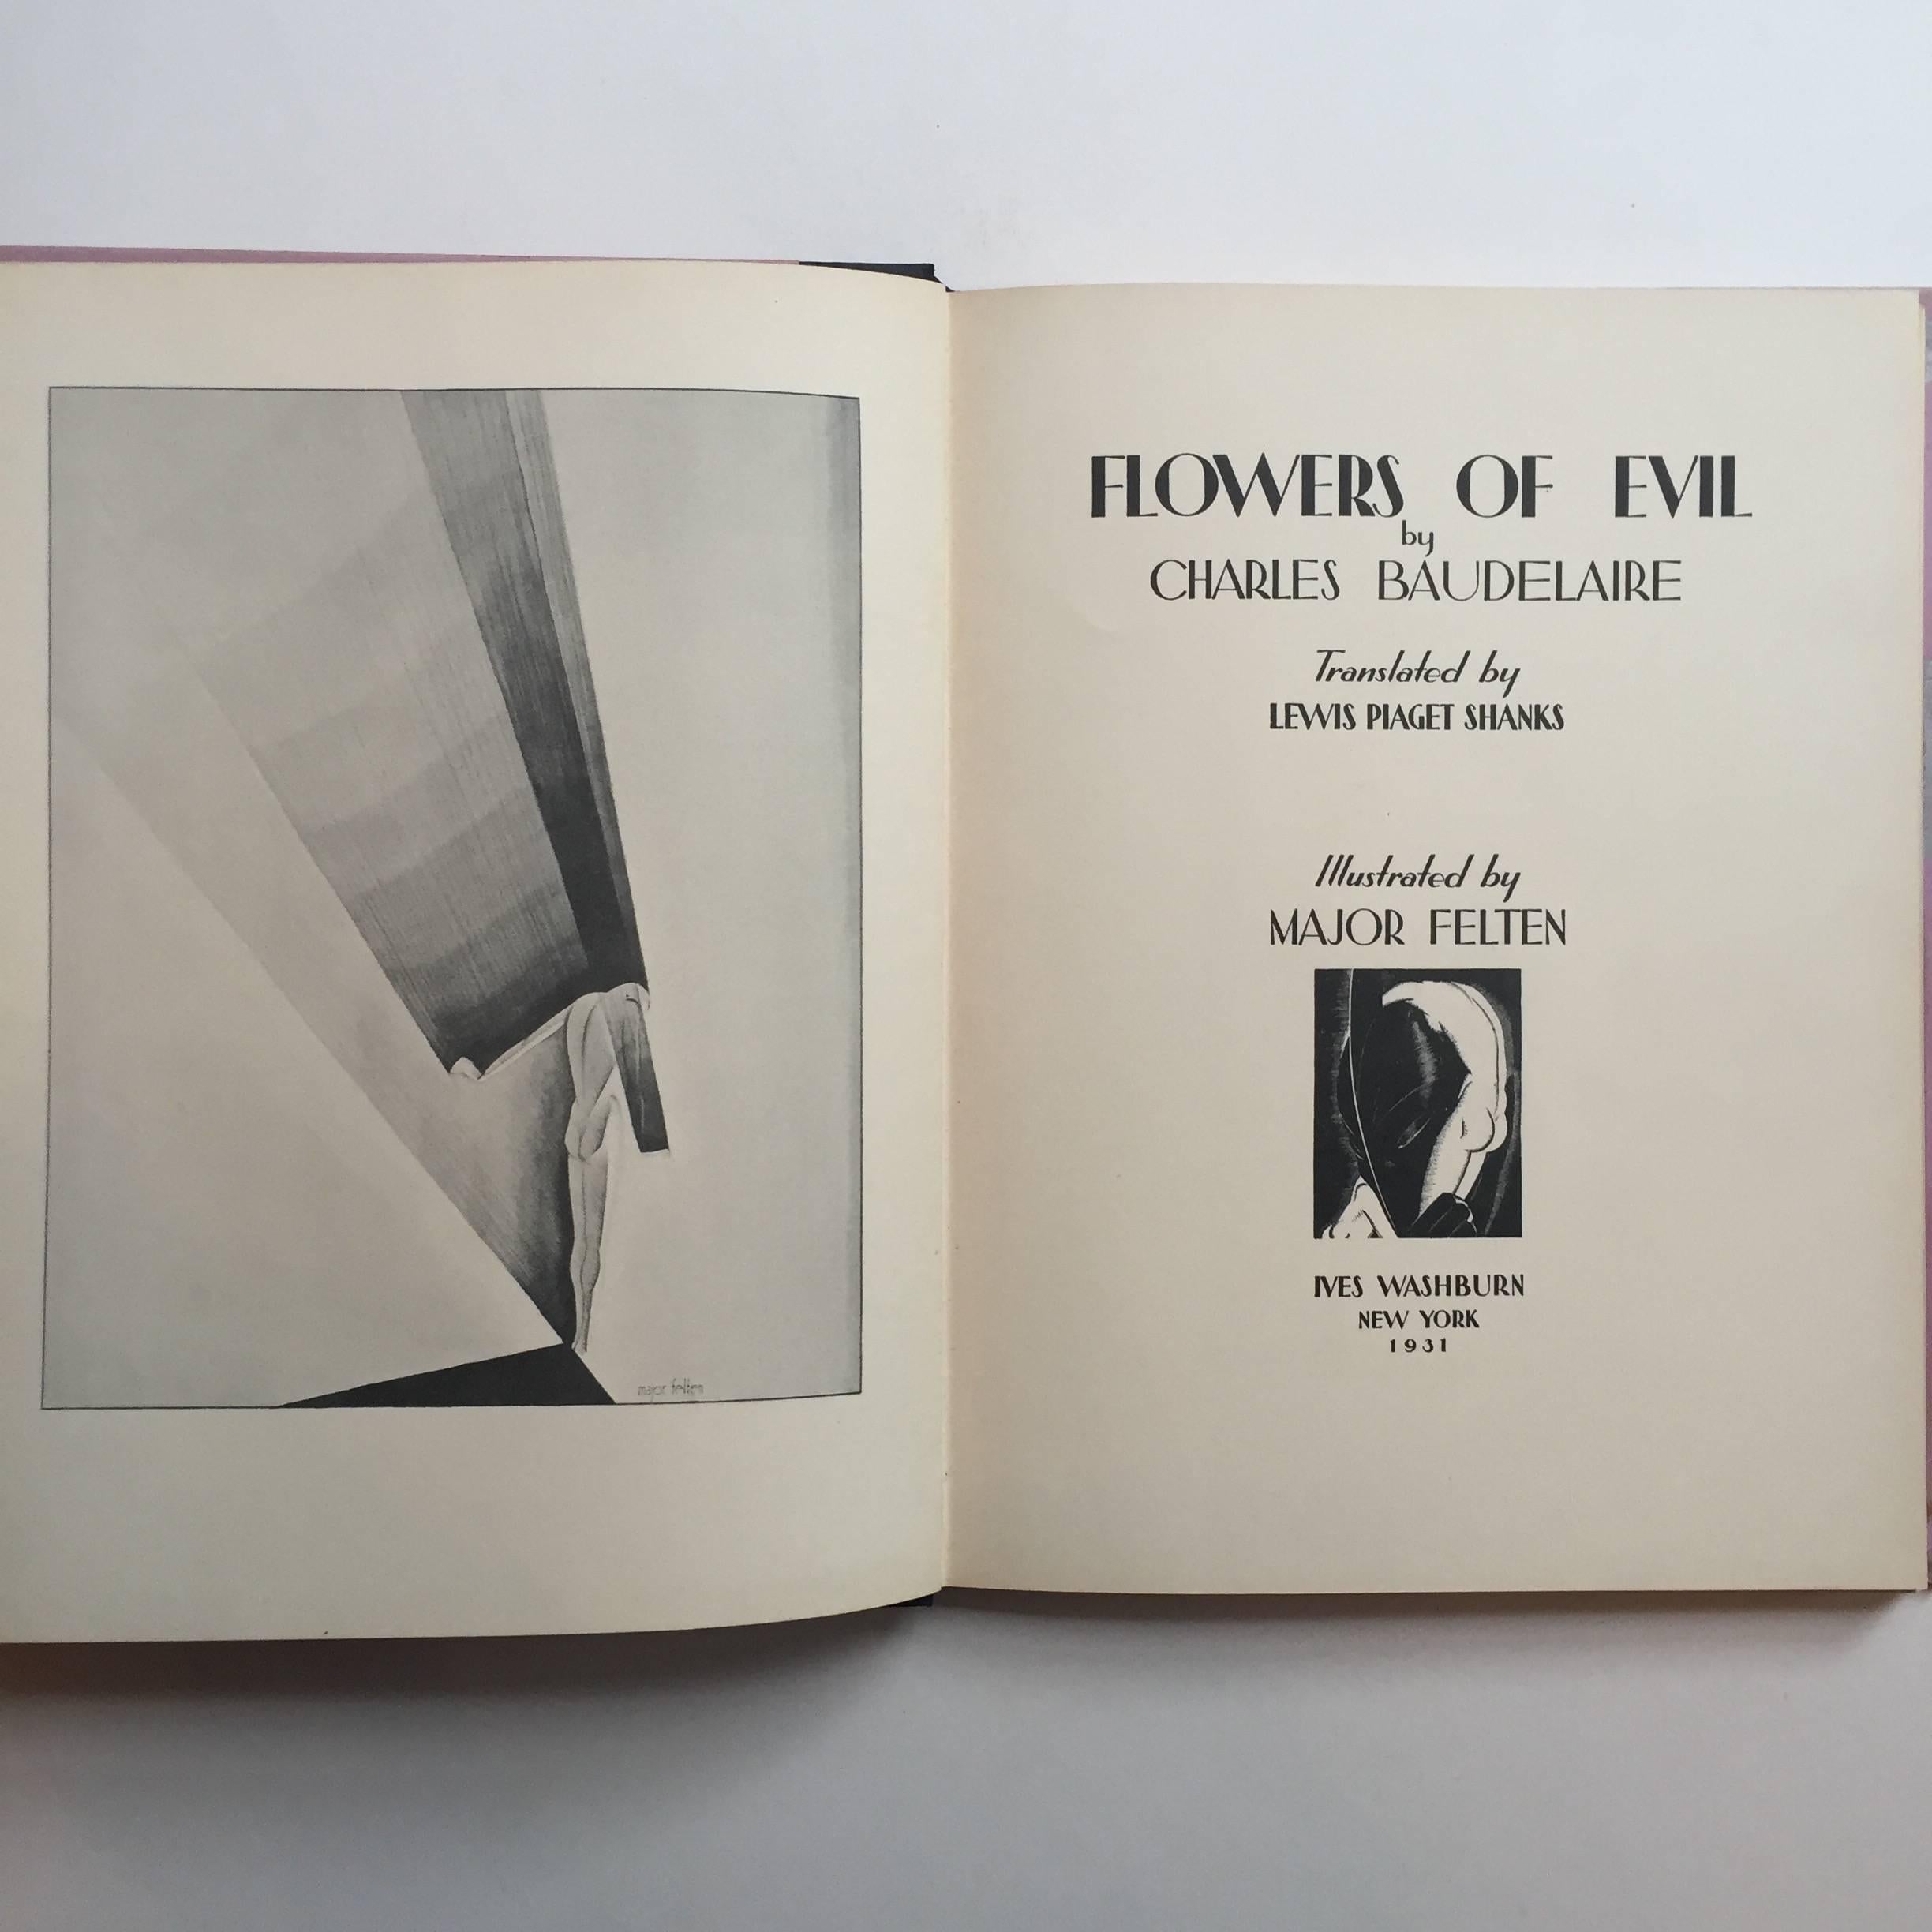 Published by Ives Washburn, 1931

This copy of Baudelaire’s widely adored volume of hedonistic and erotic poetry, ‘Flowers of Evil’ or ‘Les Fleurs du Mal’, is translated by Lewis Piaget Shanks and illustrated by the visual artist Major Felten,